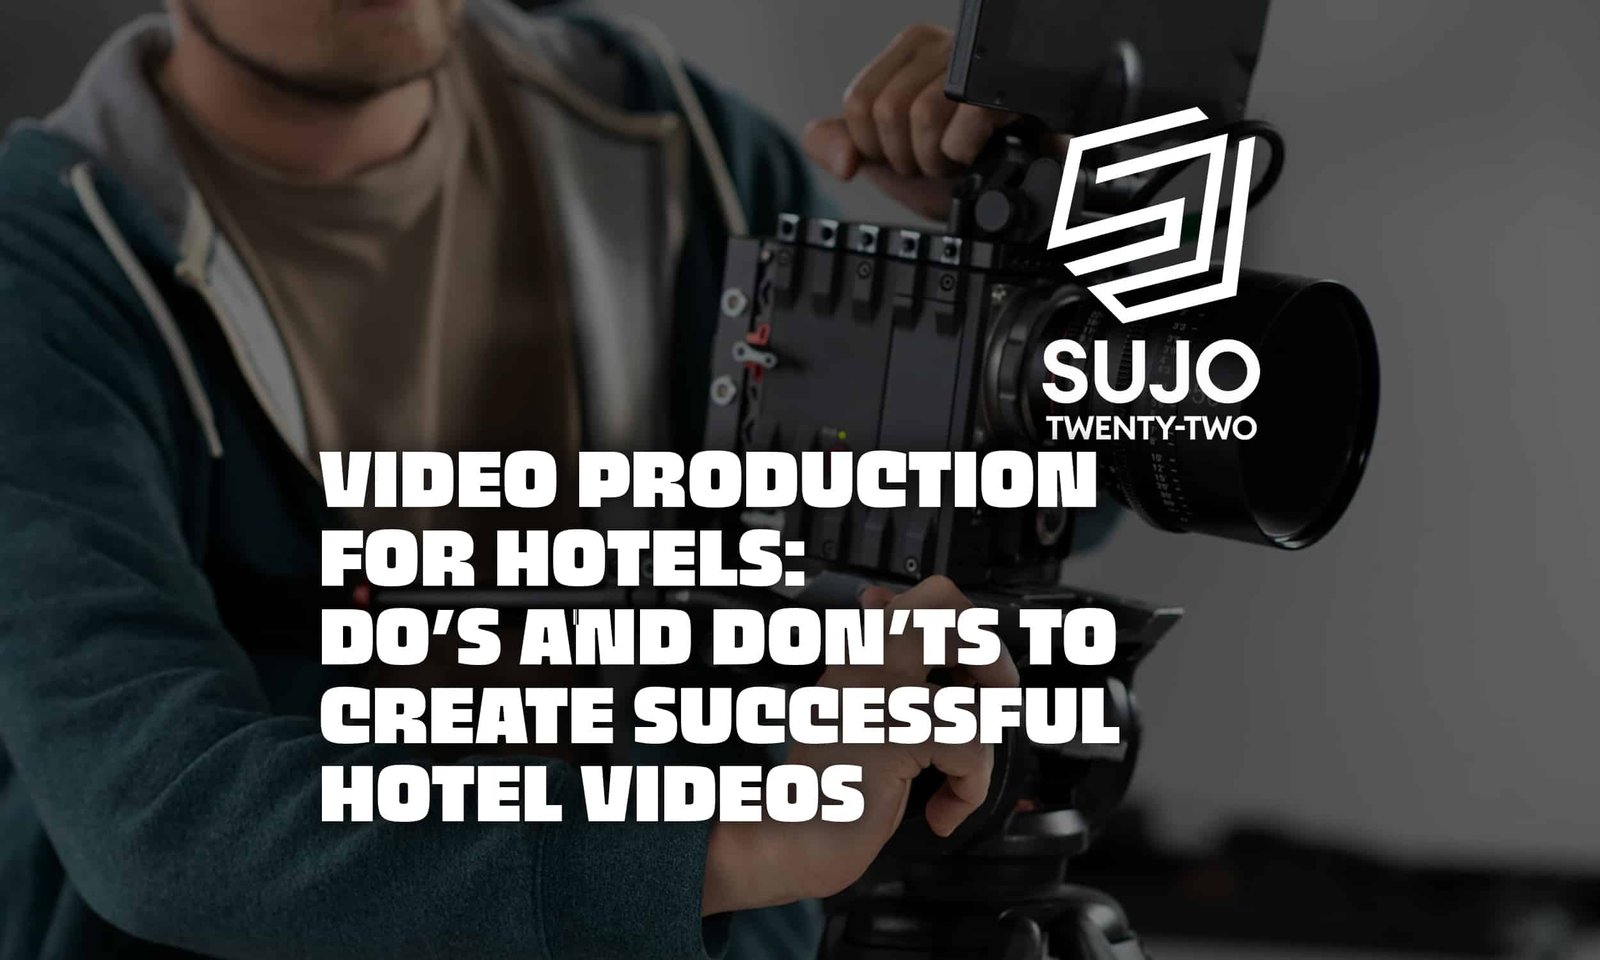 Video Production For Hotels Do’s And Don’ts To Create Successful Hotel Videos | SUJO TWENTY-TWO